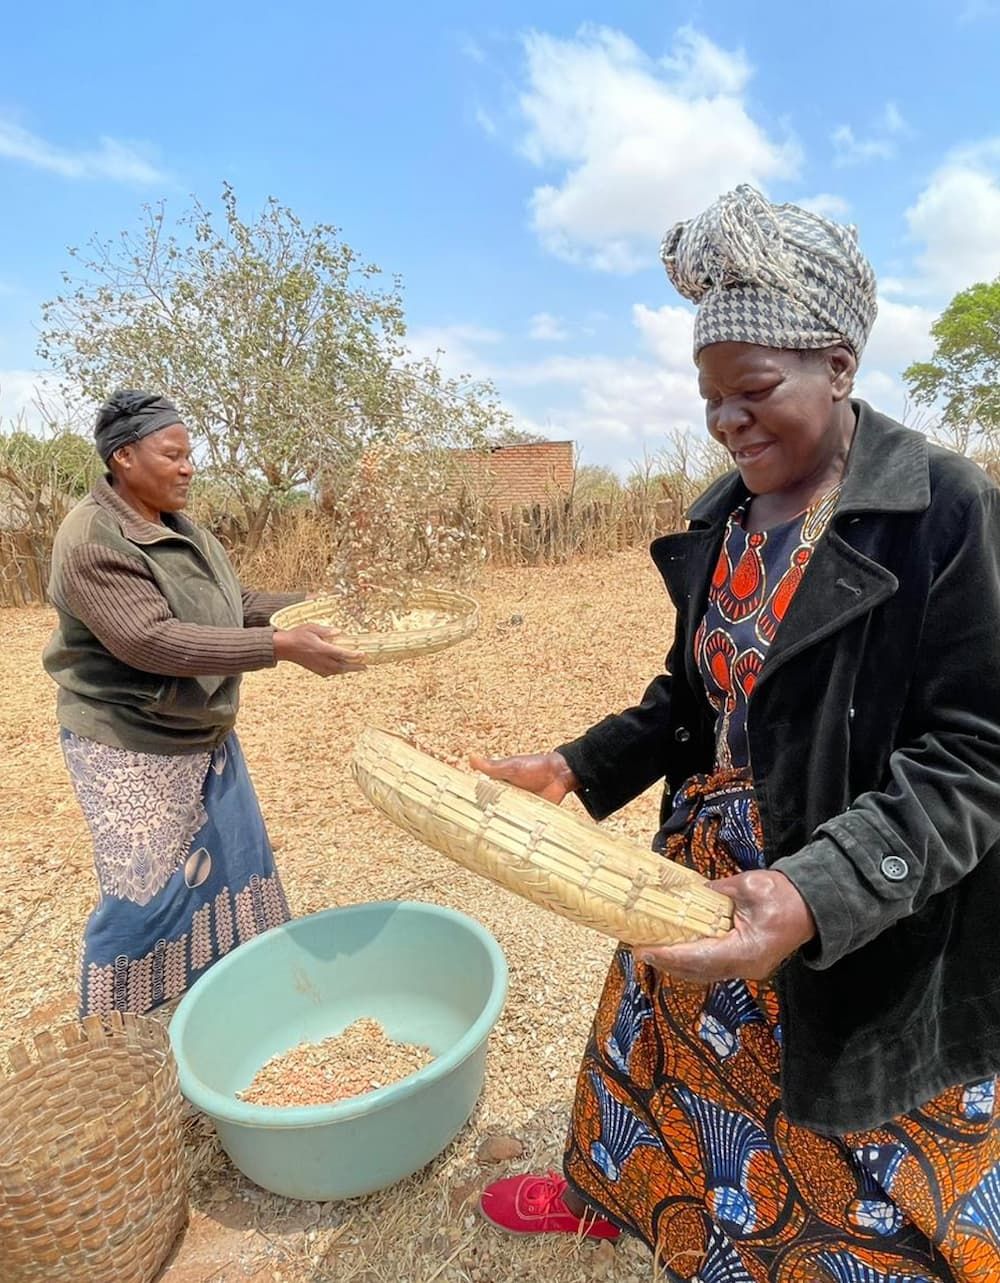 Women working in agriculture in Zambia